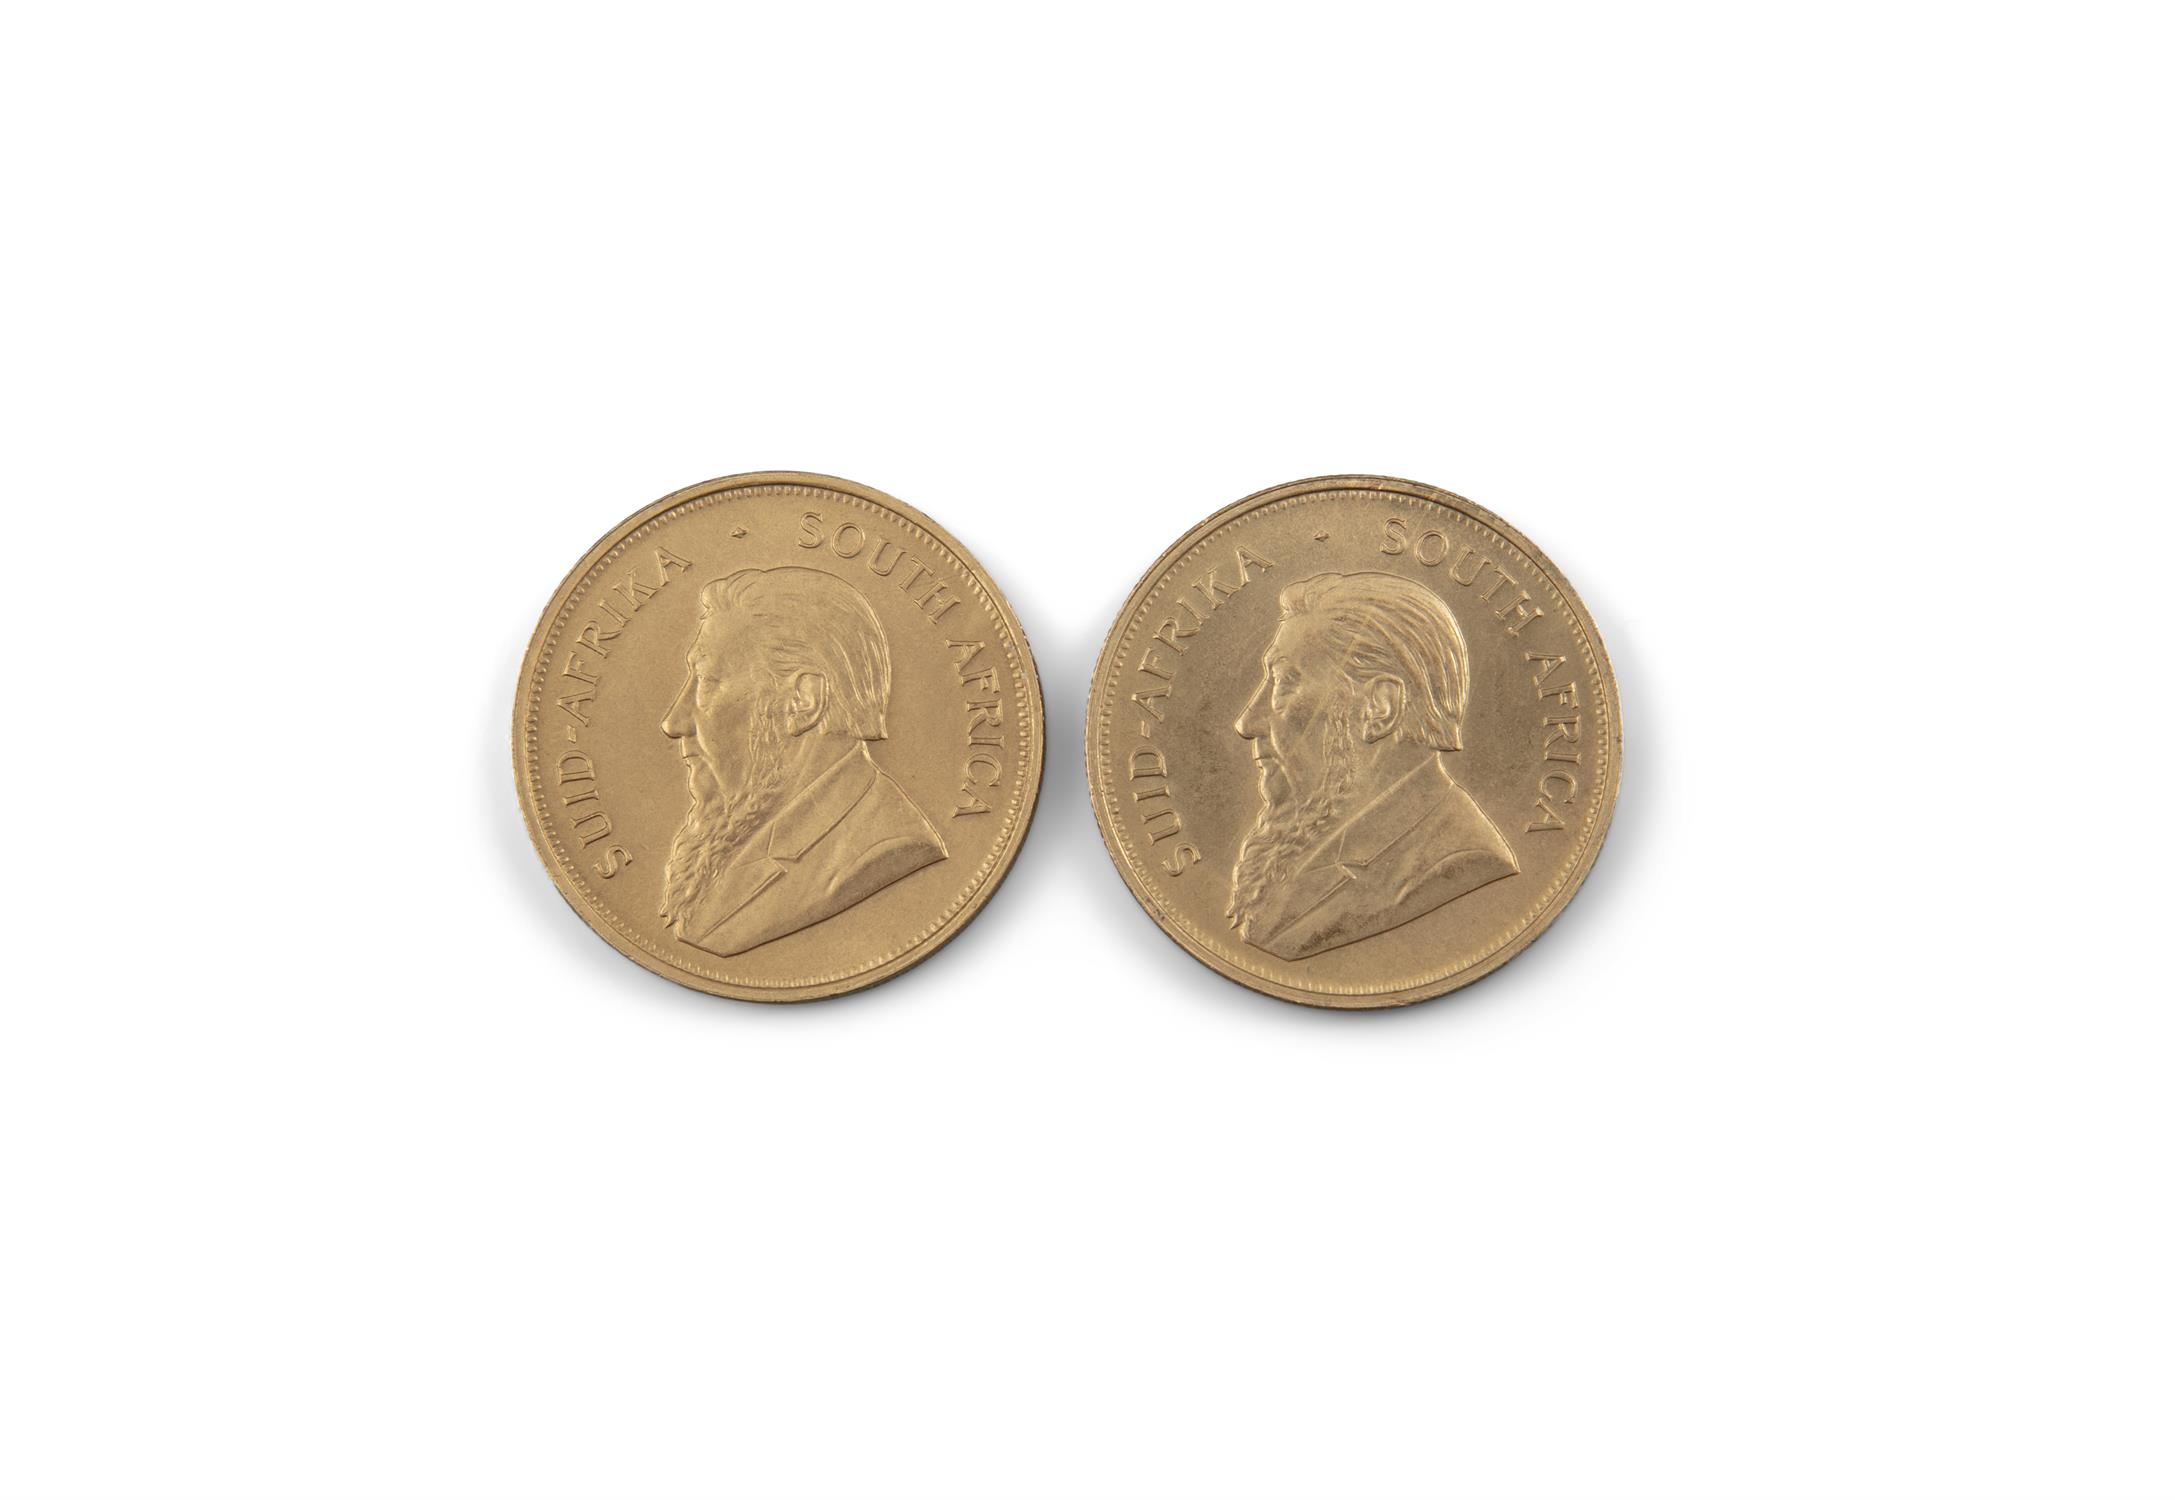 TWO SOUTH AFRICAN GOLD KRUGERRAND COINS, 1974, (68 grams) - Image 2 of 2